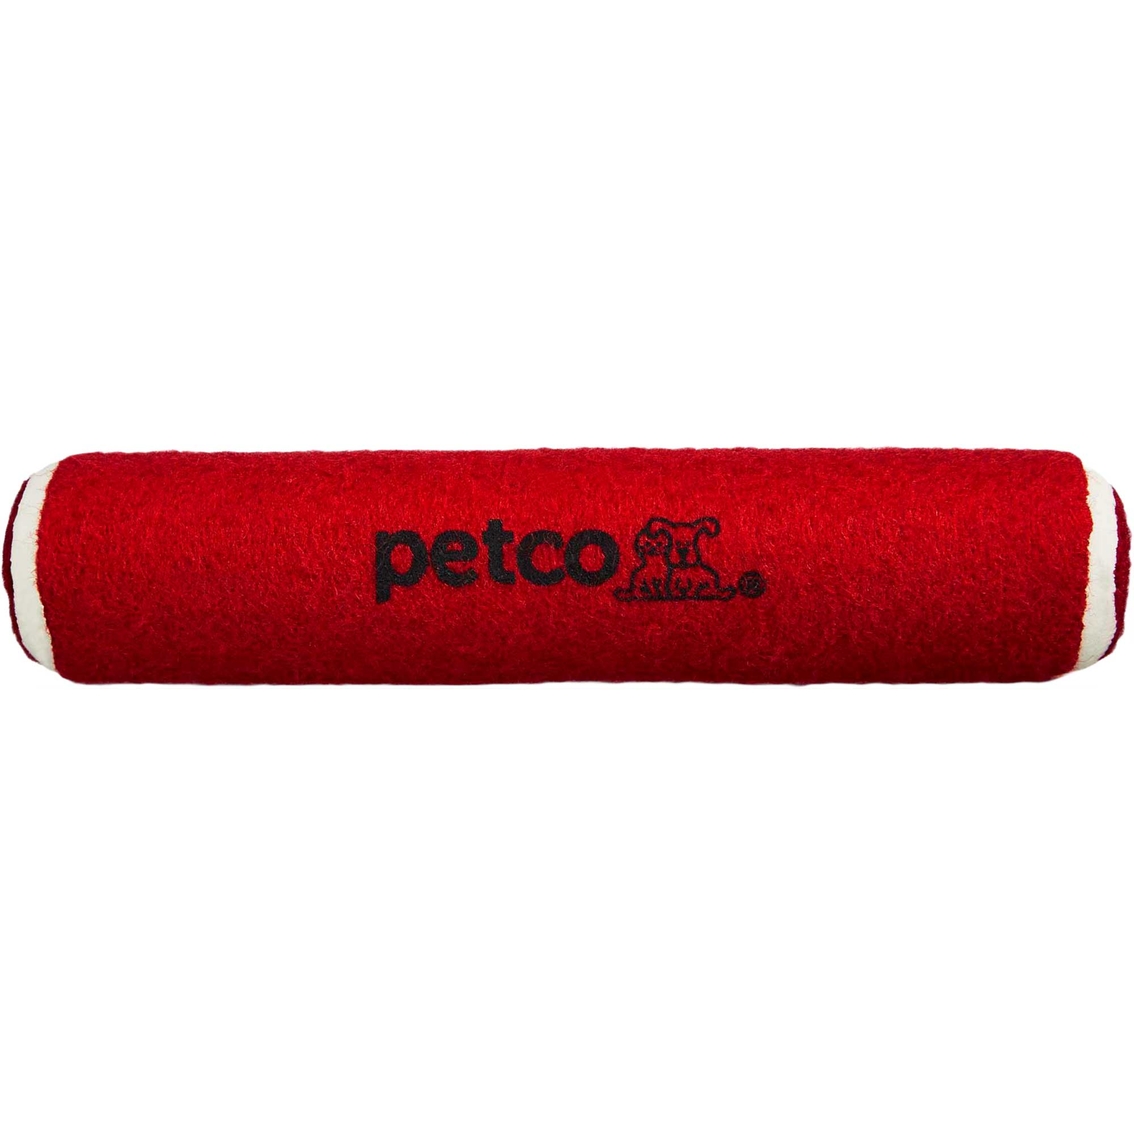 Petco Tennis Ball and Stick Dog Toy 7.5 in., Assorted Colors - Image 3 of 3